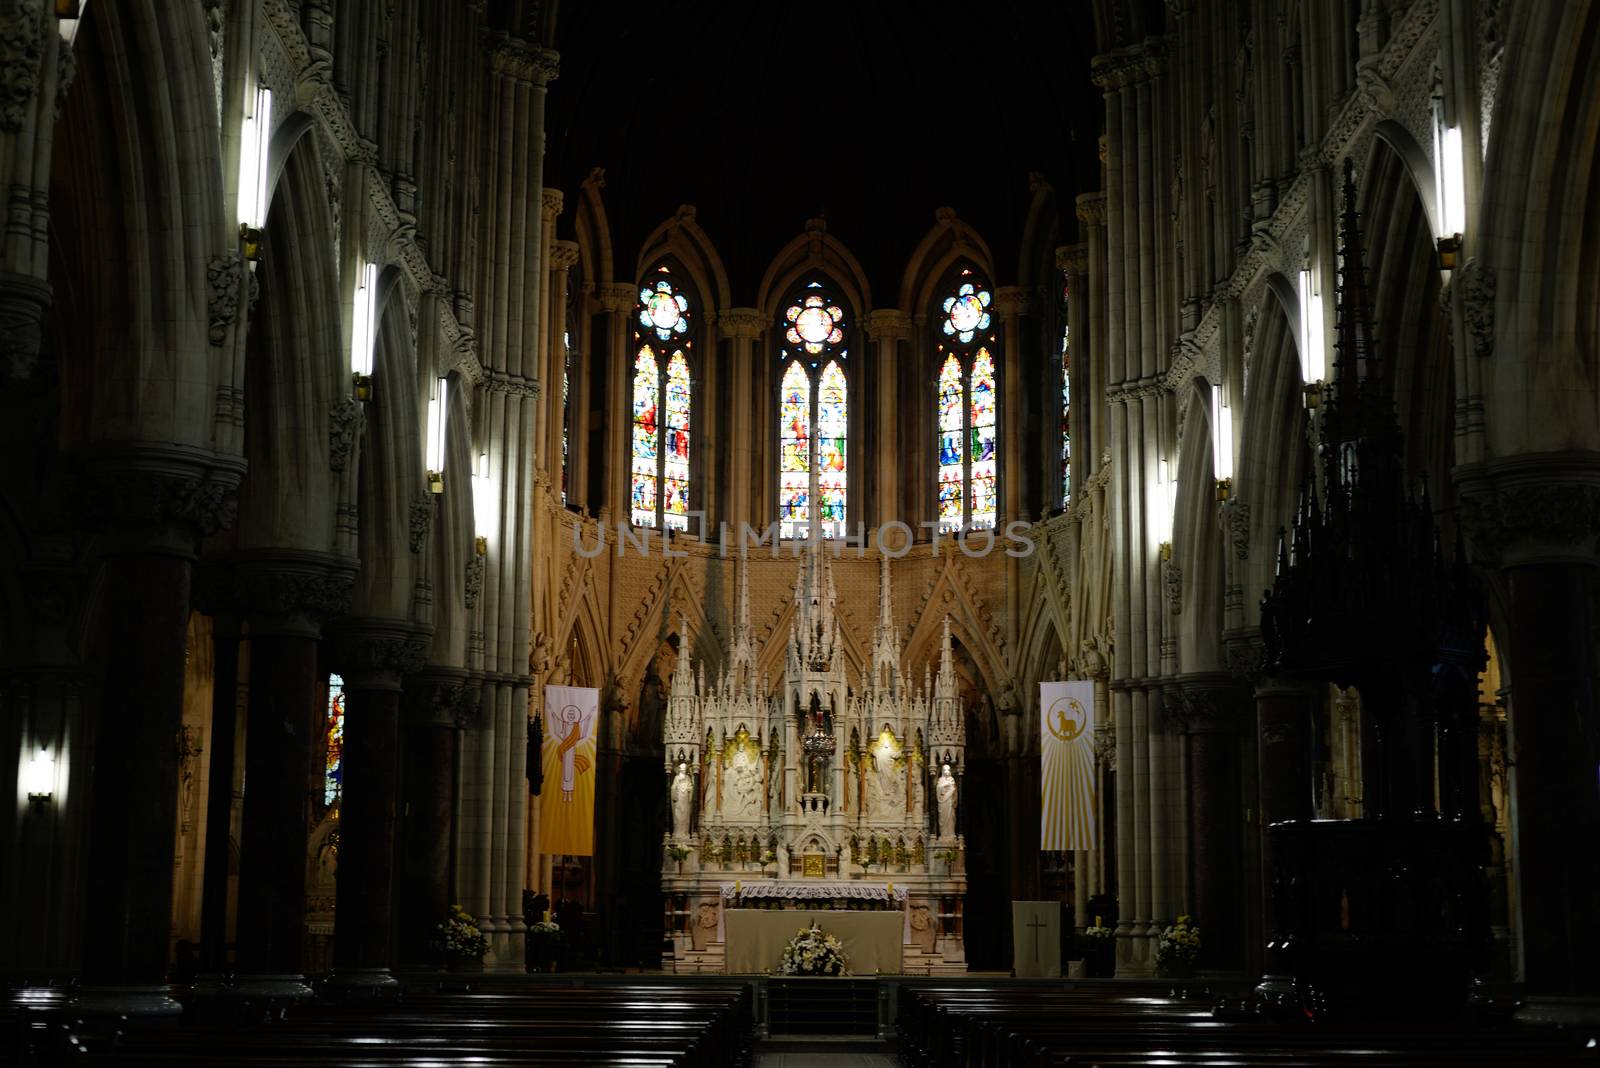 interior of St Colman's Cathedra by morrbyte